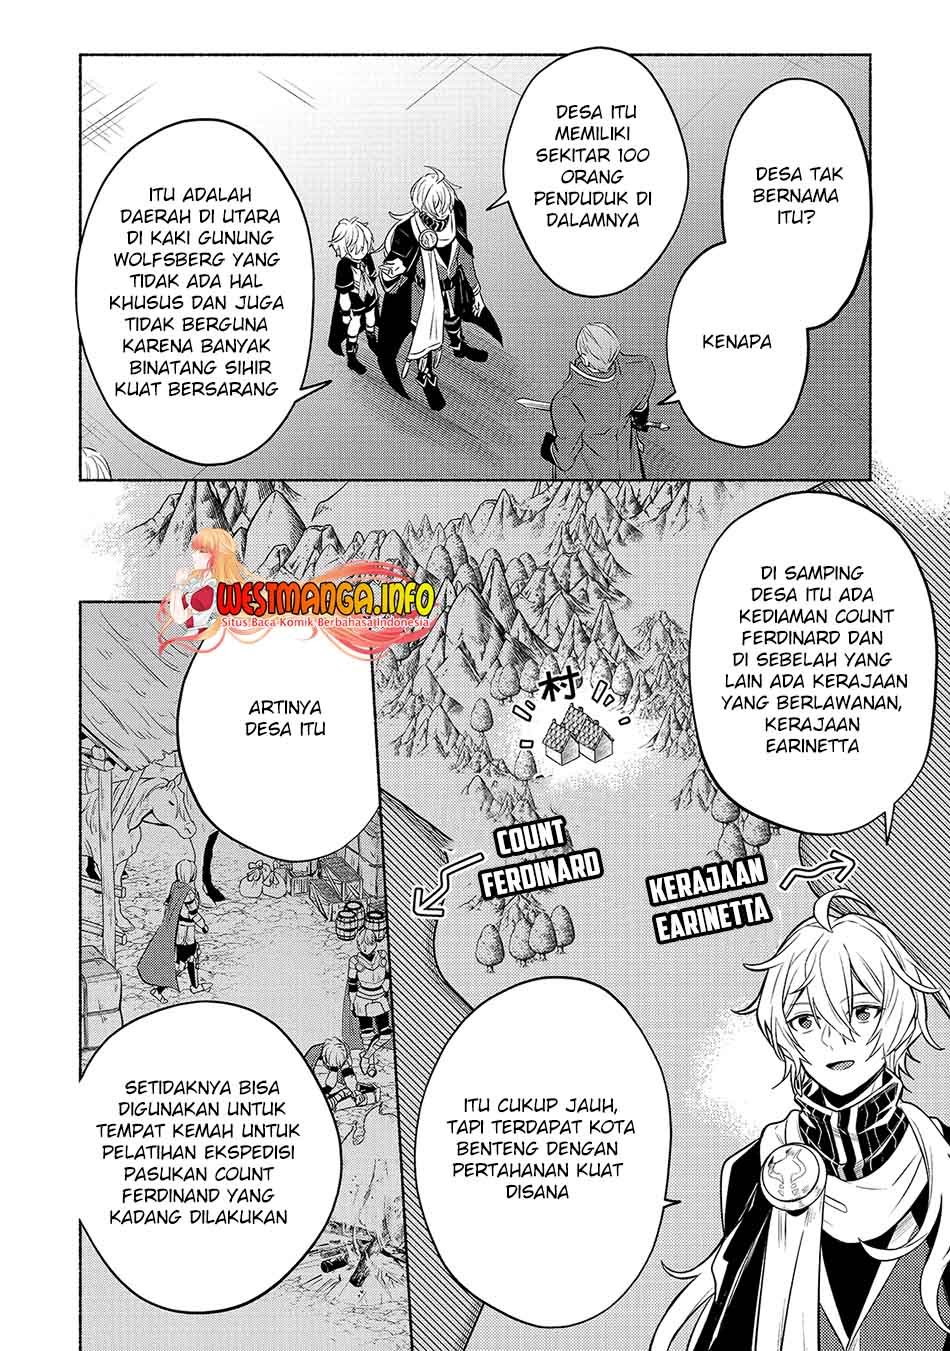 Fun Territory Defense Of The Easy-going Lord ~the Nameless Village Is Made Into The Strongest Fortified City By Production Magic~ Chapter 3